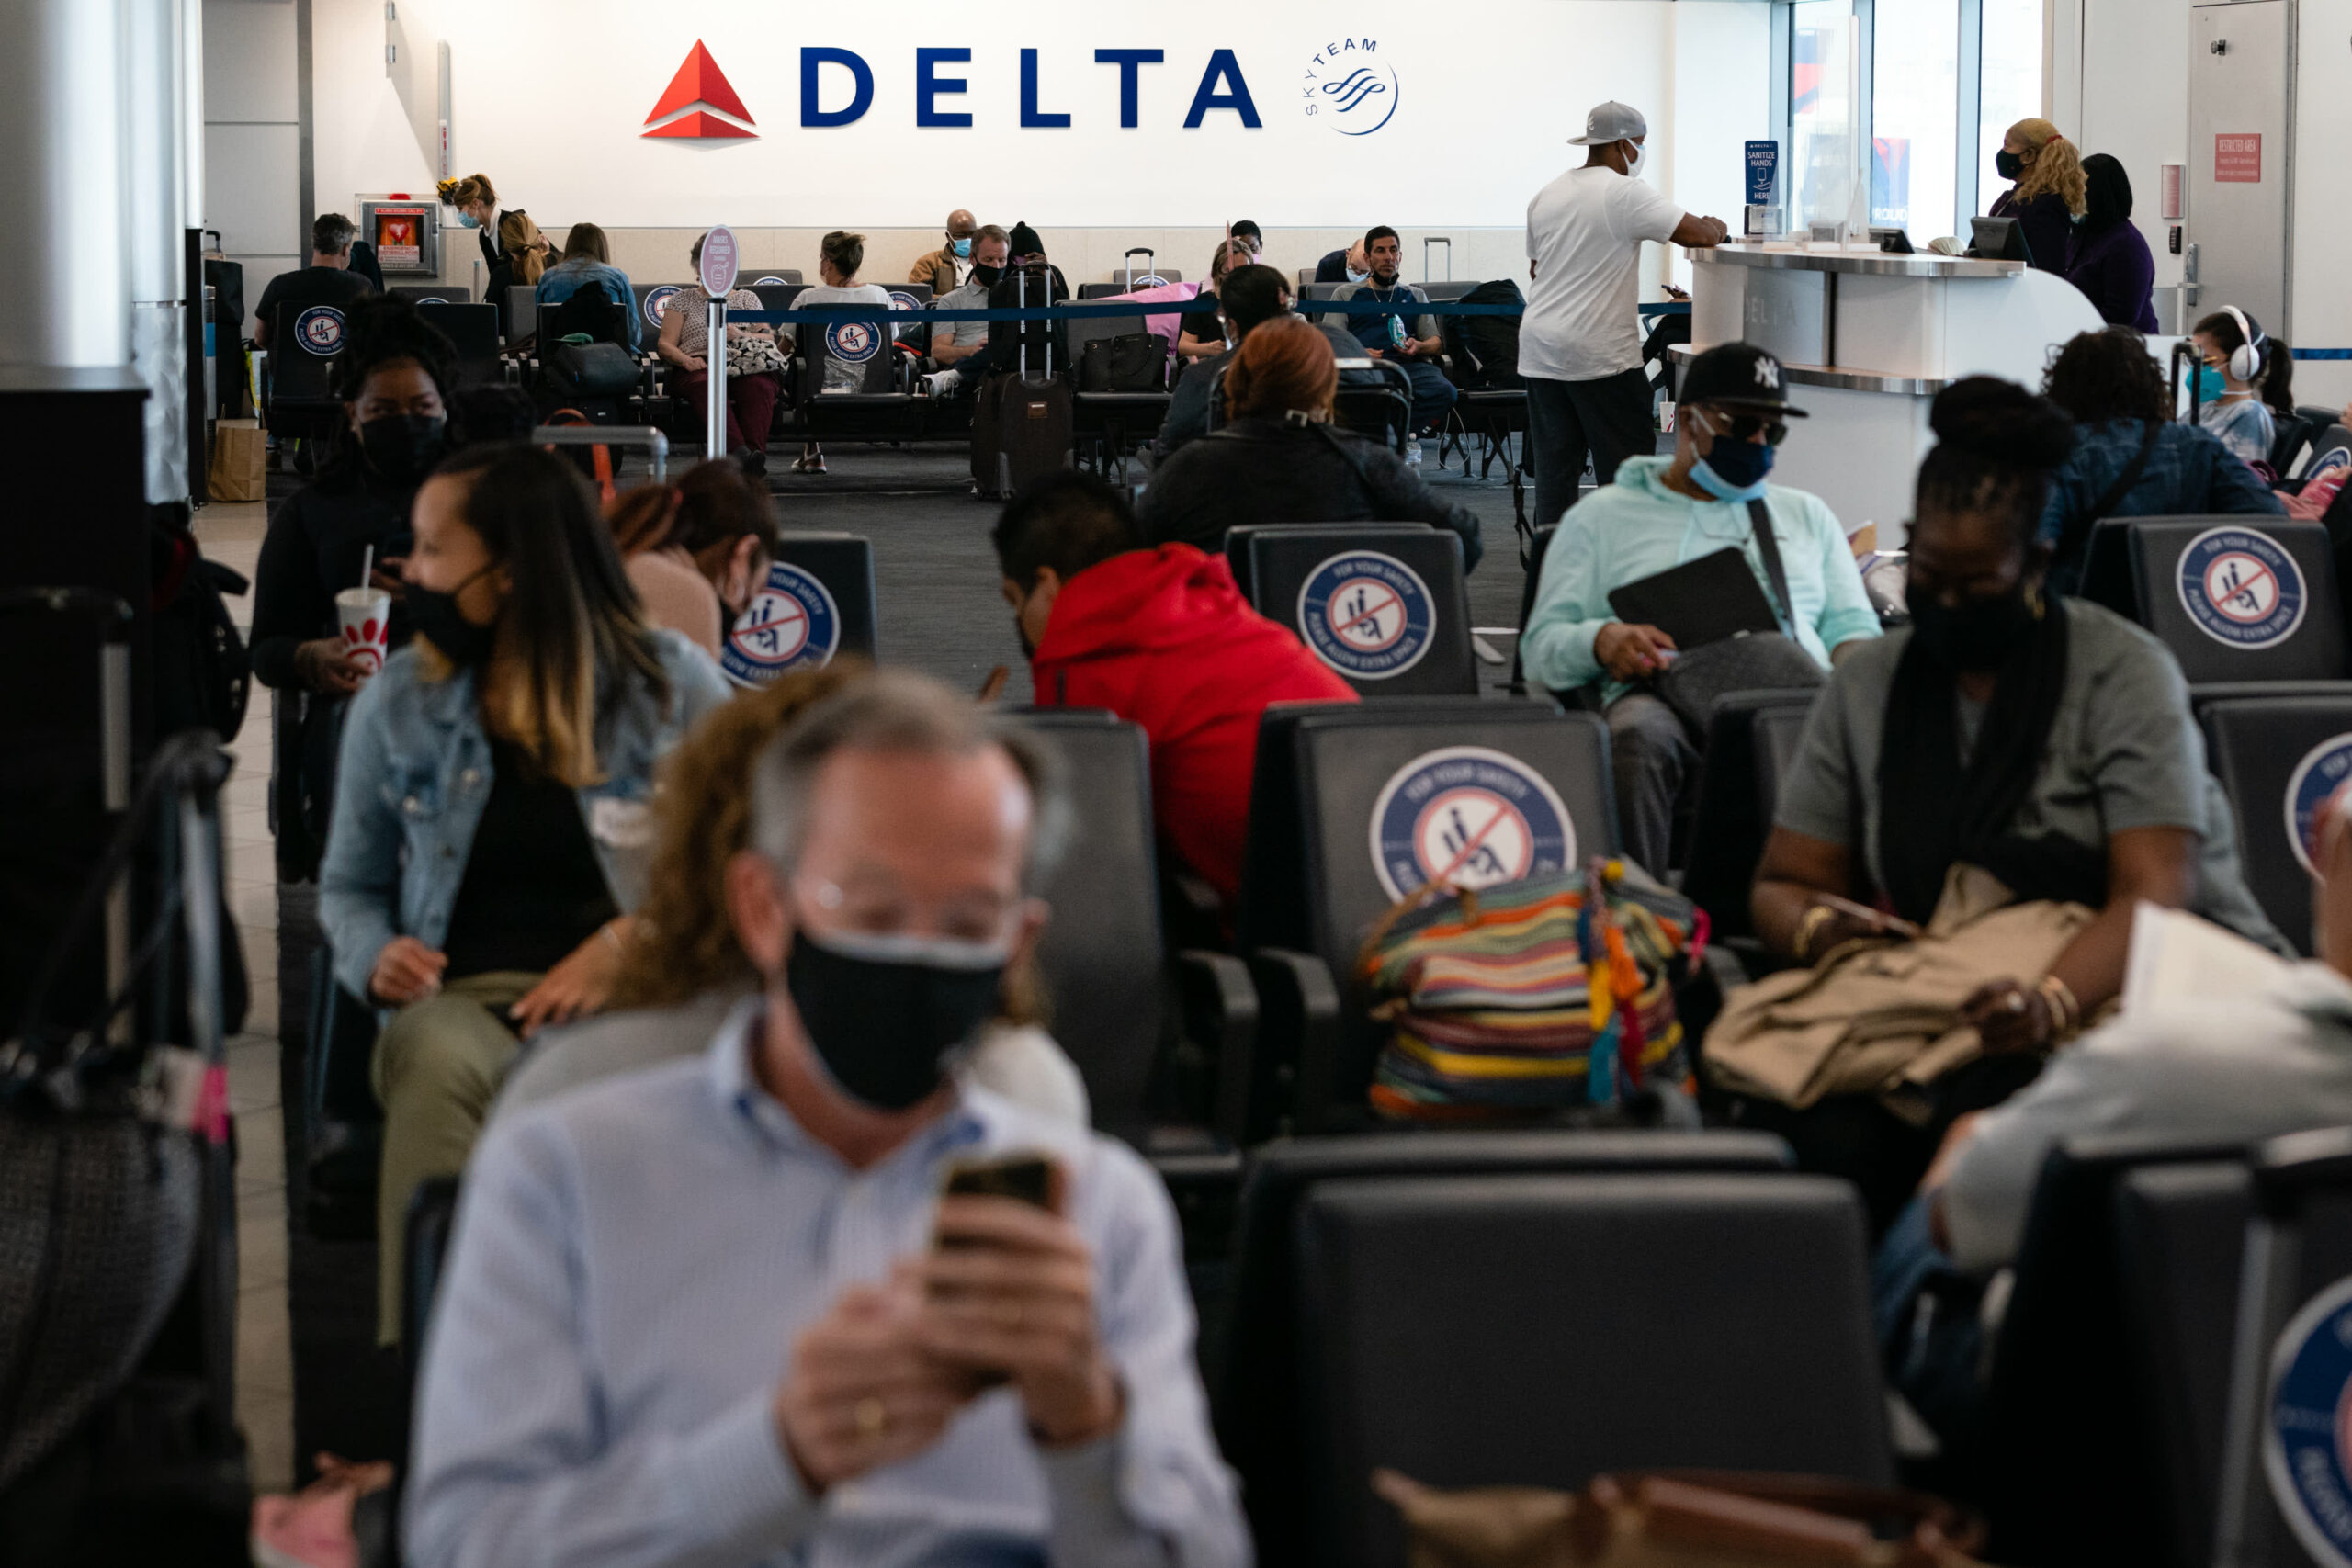 Delta wants other airlines to share ‘no-fly’ lists of unruly passengers